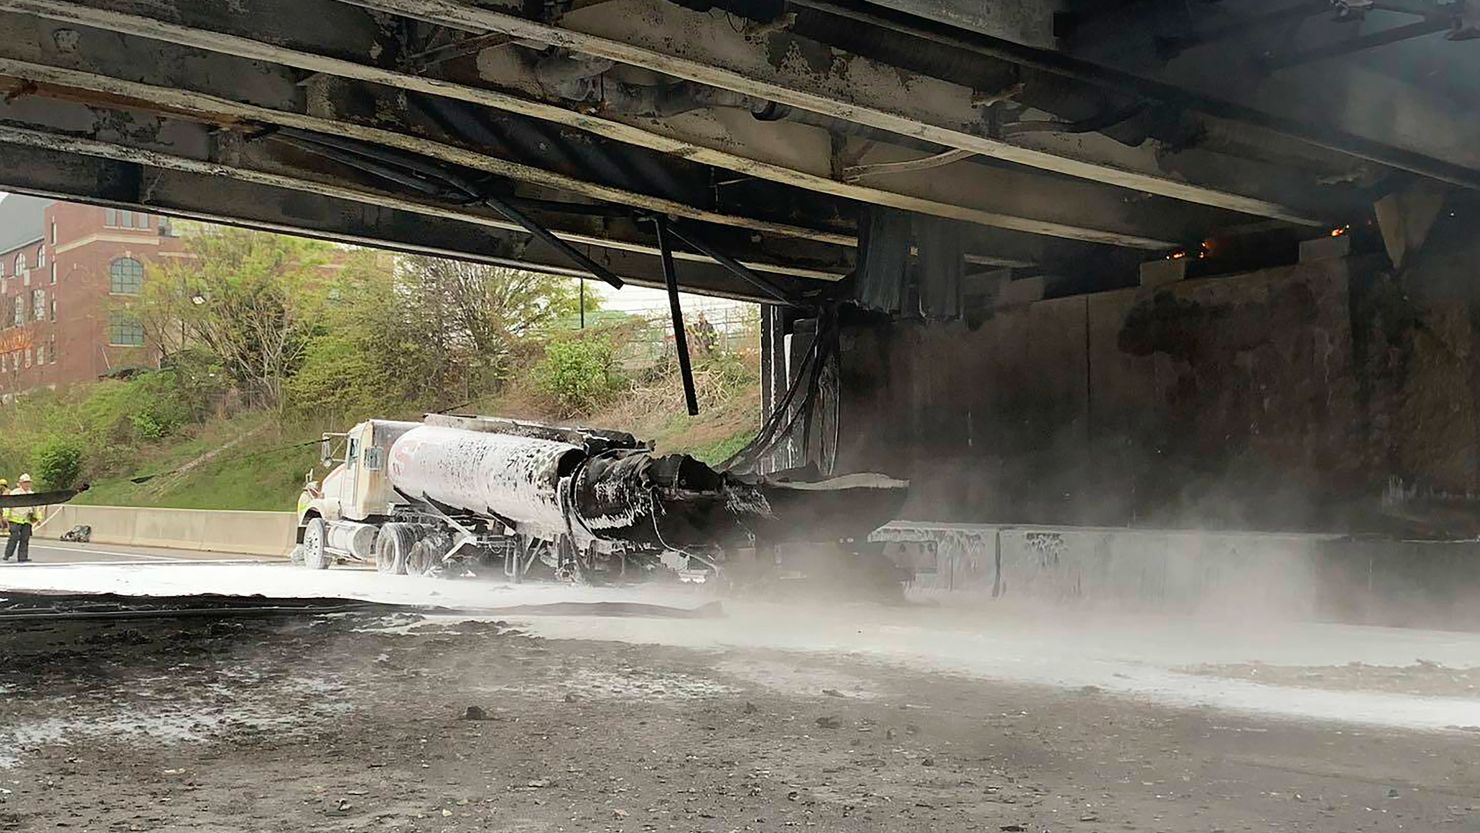 A tanker carrying 8,500 gallons of gasoline caught fire Thursday after a multi-vehicle crash on I-95 in Norwalk, Connecticut.